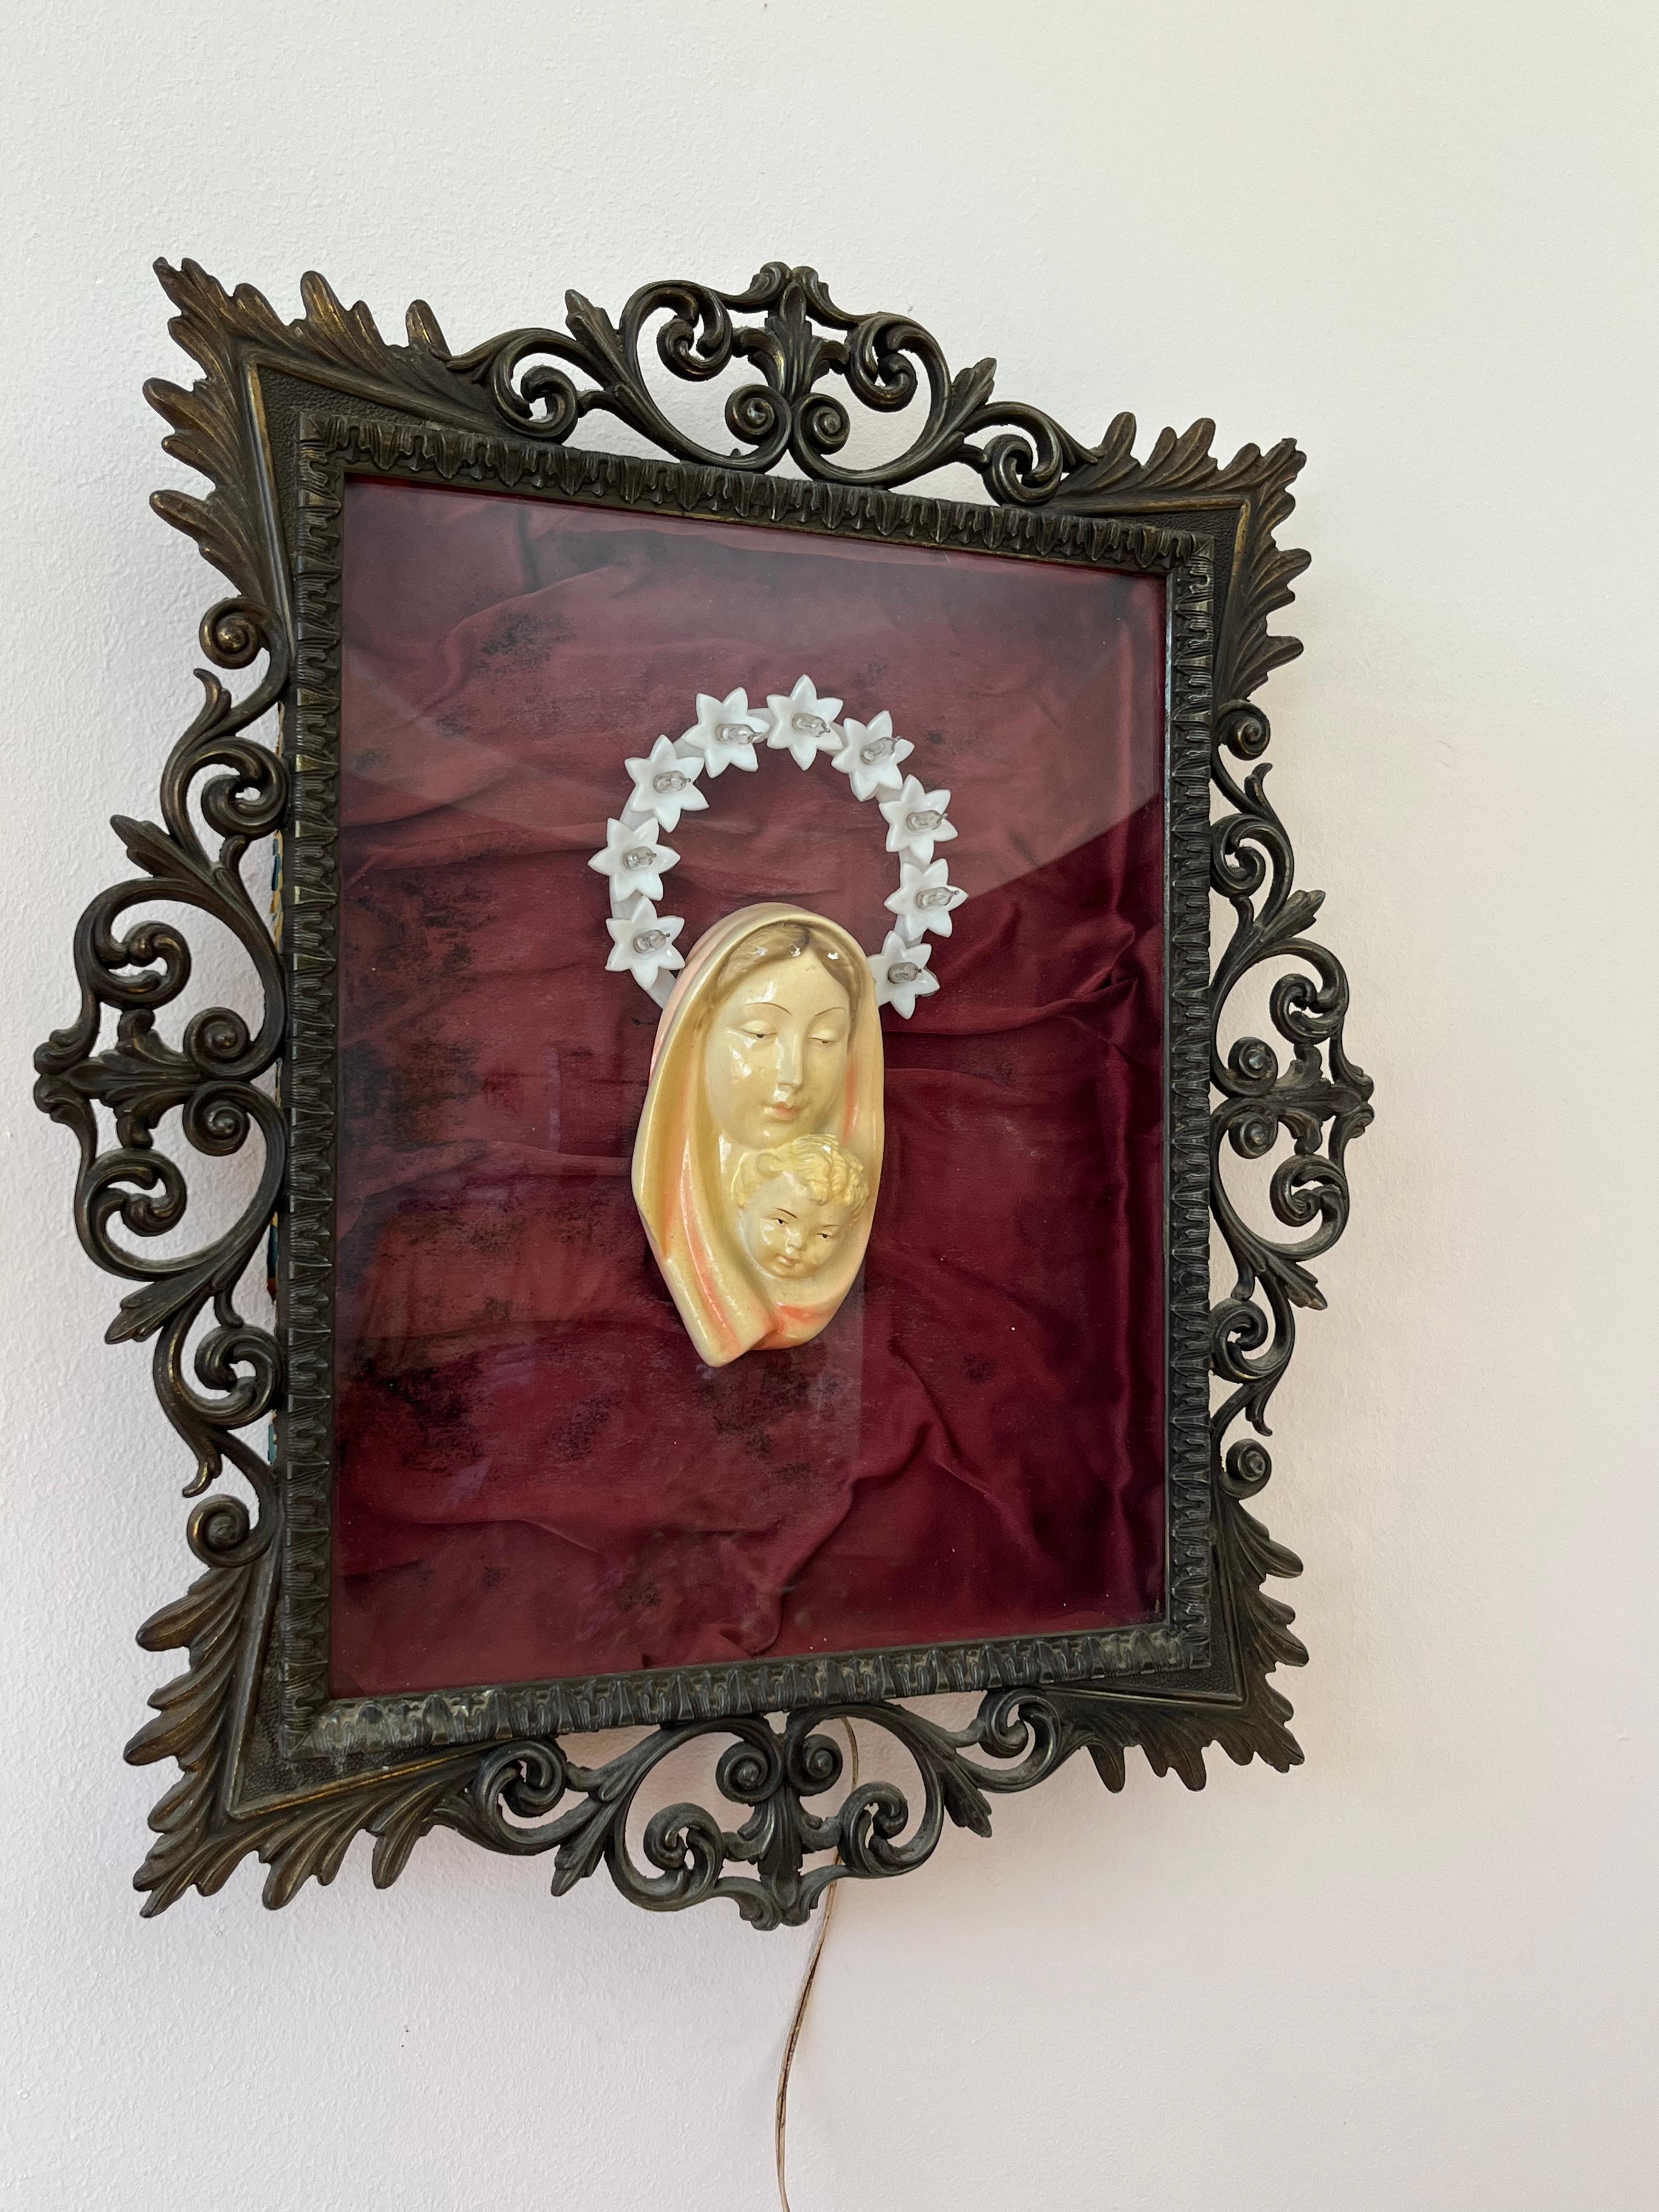 Bedside of the Madonna with Child, found in a noble apartment.
The Madonna has an electric star star that lights up. The frame is made of bronze.
Protective glass. Good conditions.
Intact and functioning.